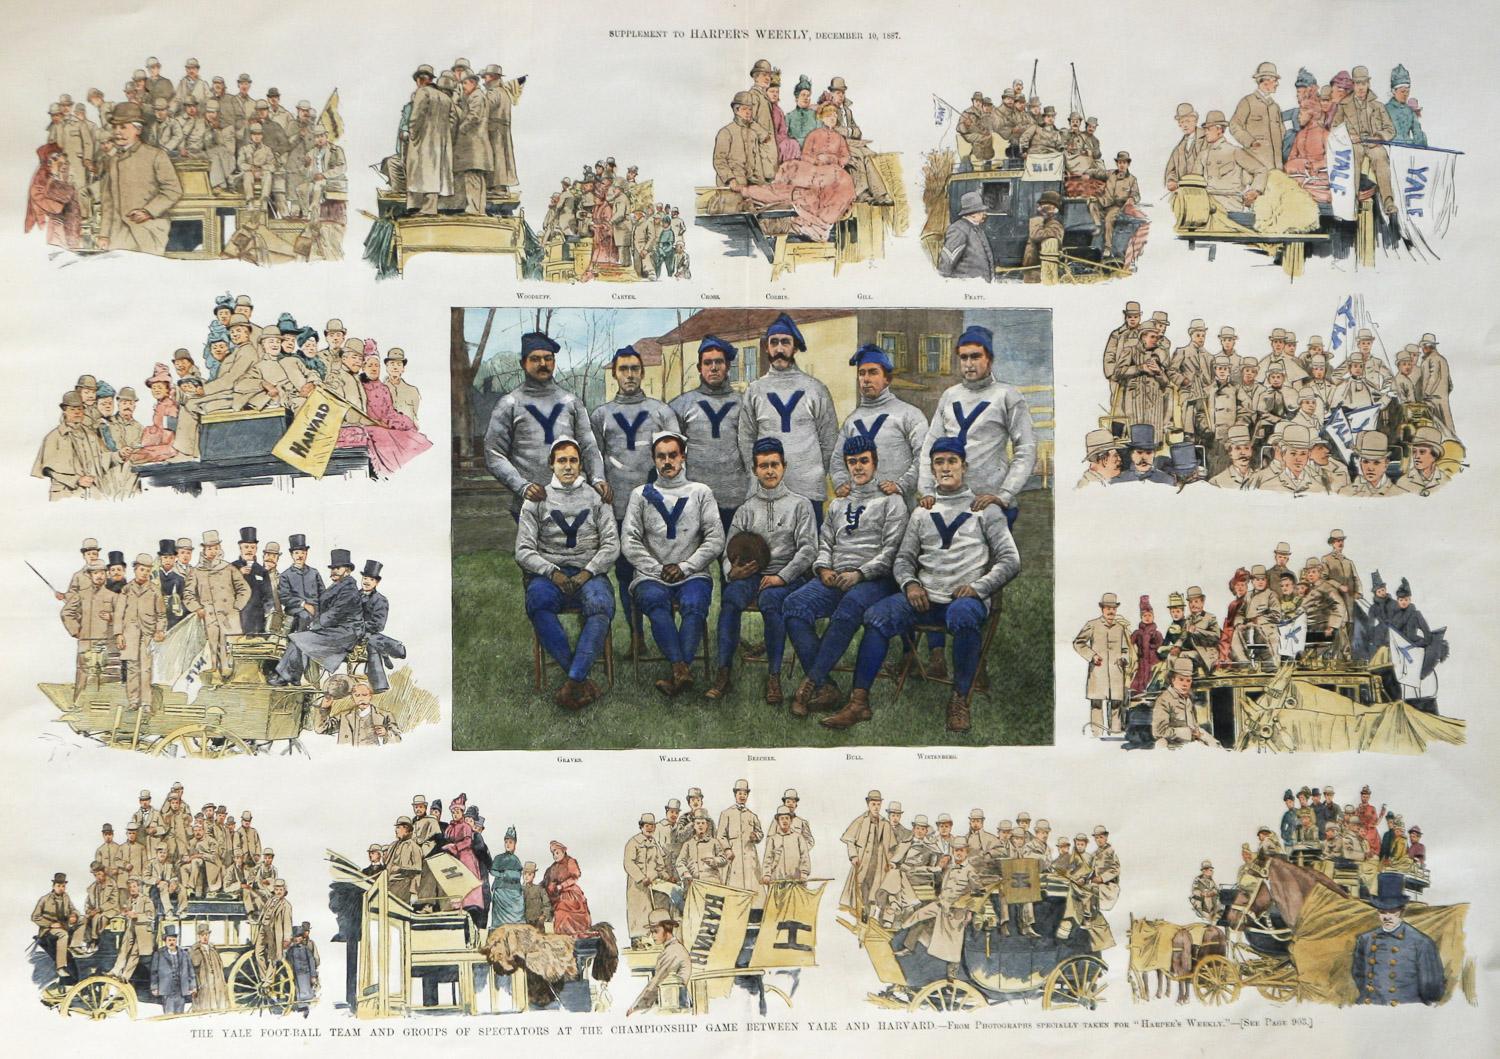 Unknown Portrait Print - The Yale Football Team and Groups of Spectators at the Championship Game between